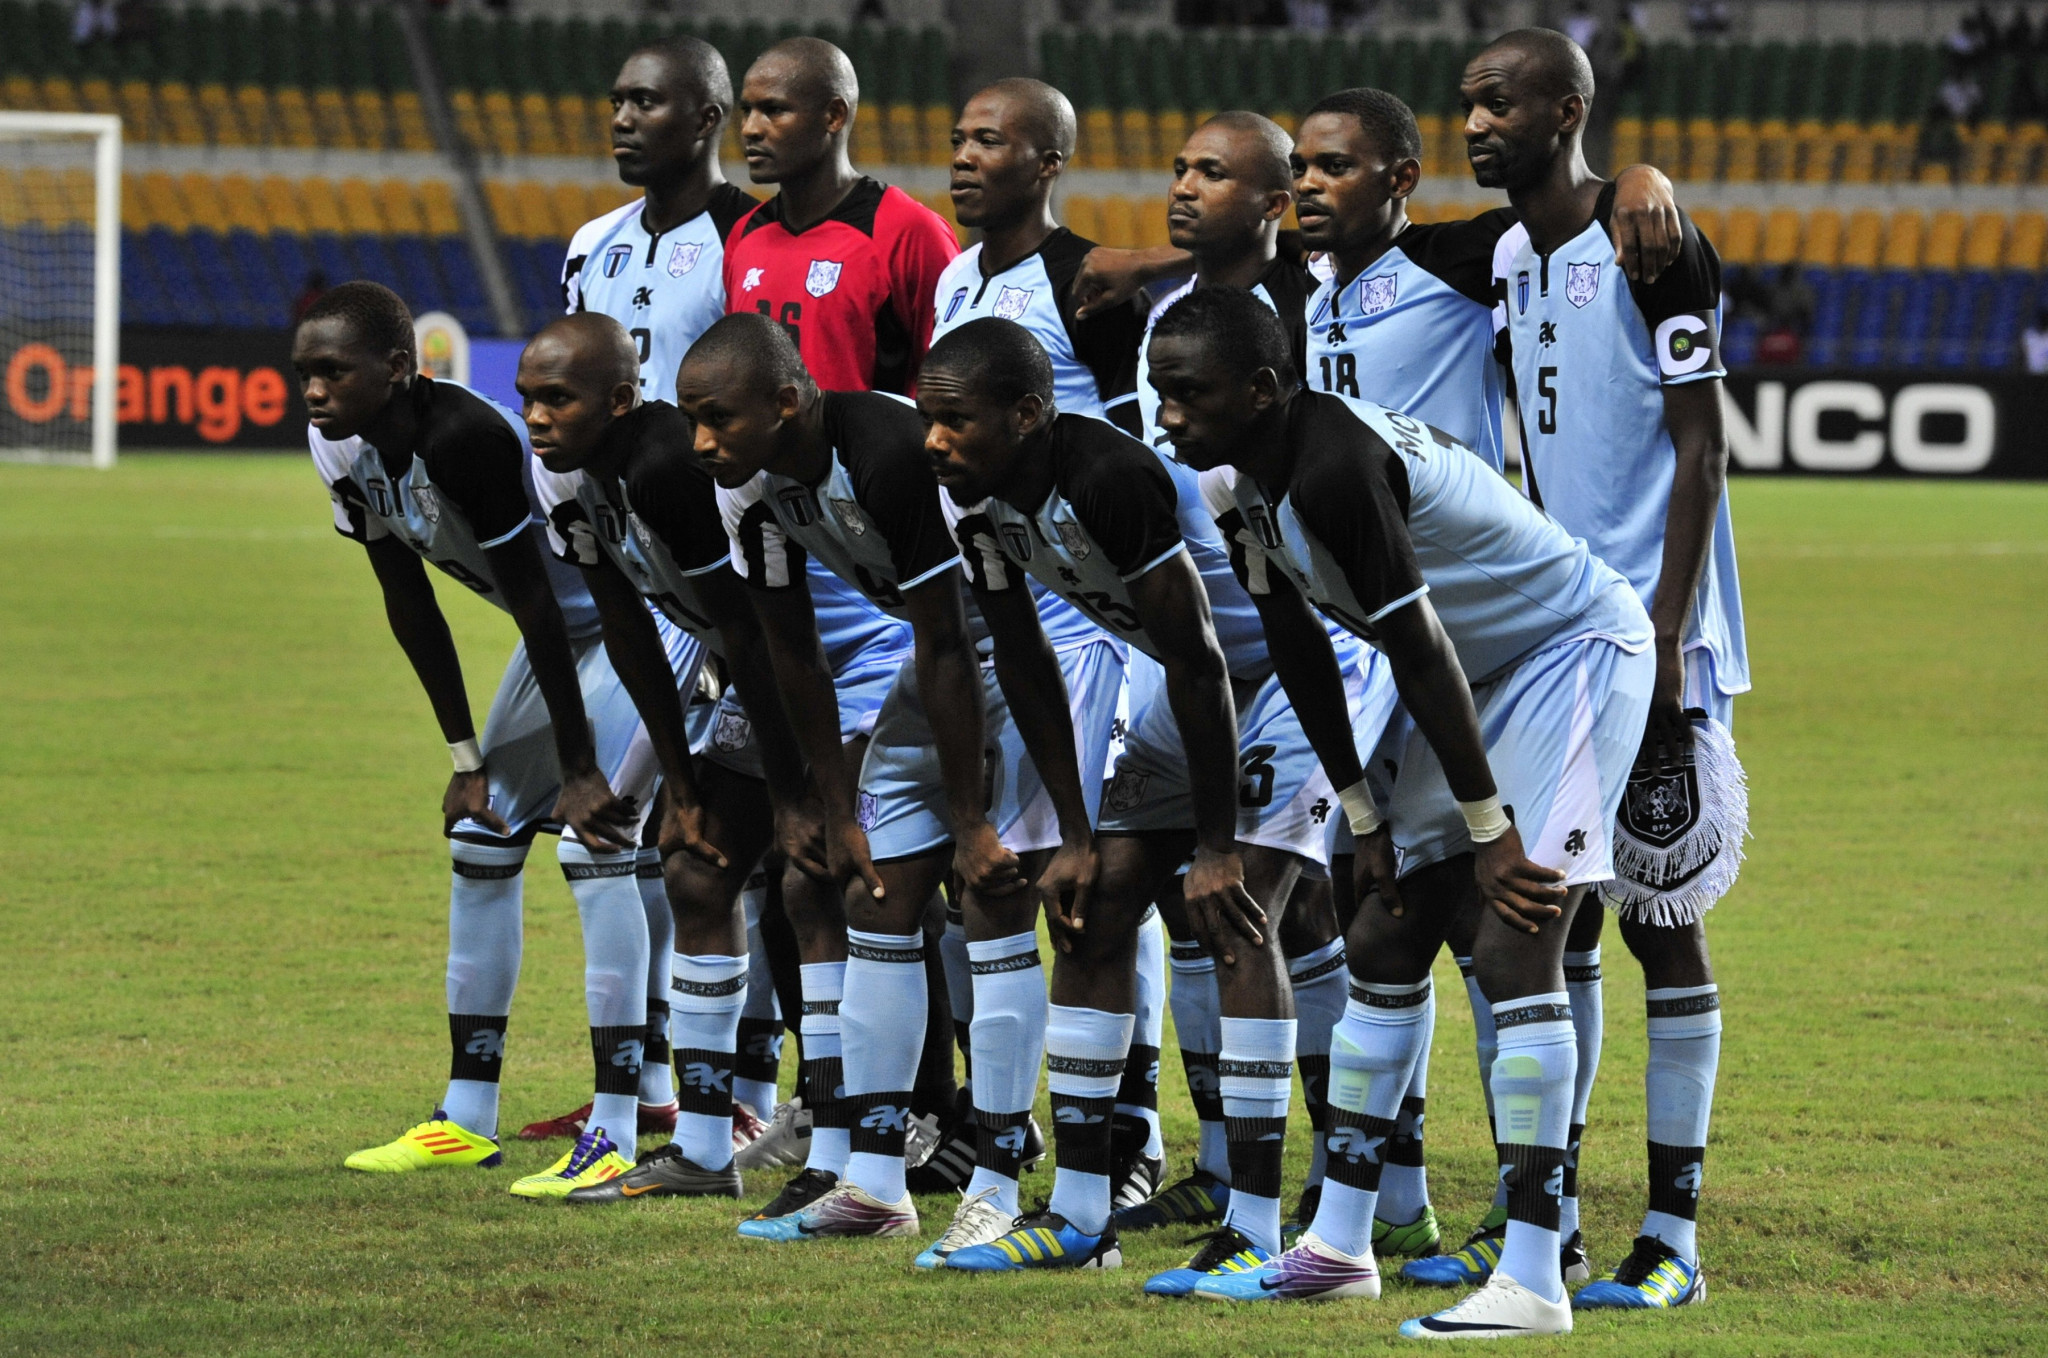 Botswana last qualified for the men's Africa Cup of Nations in 2012 ©Getty Images